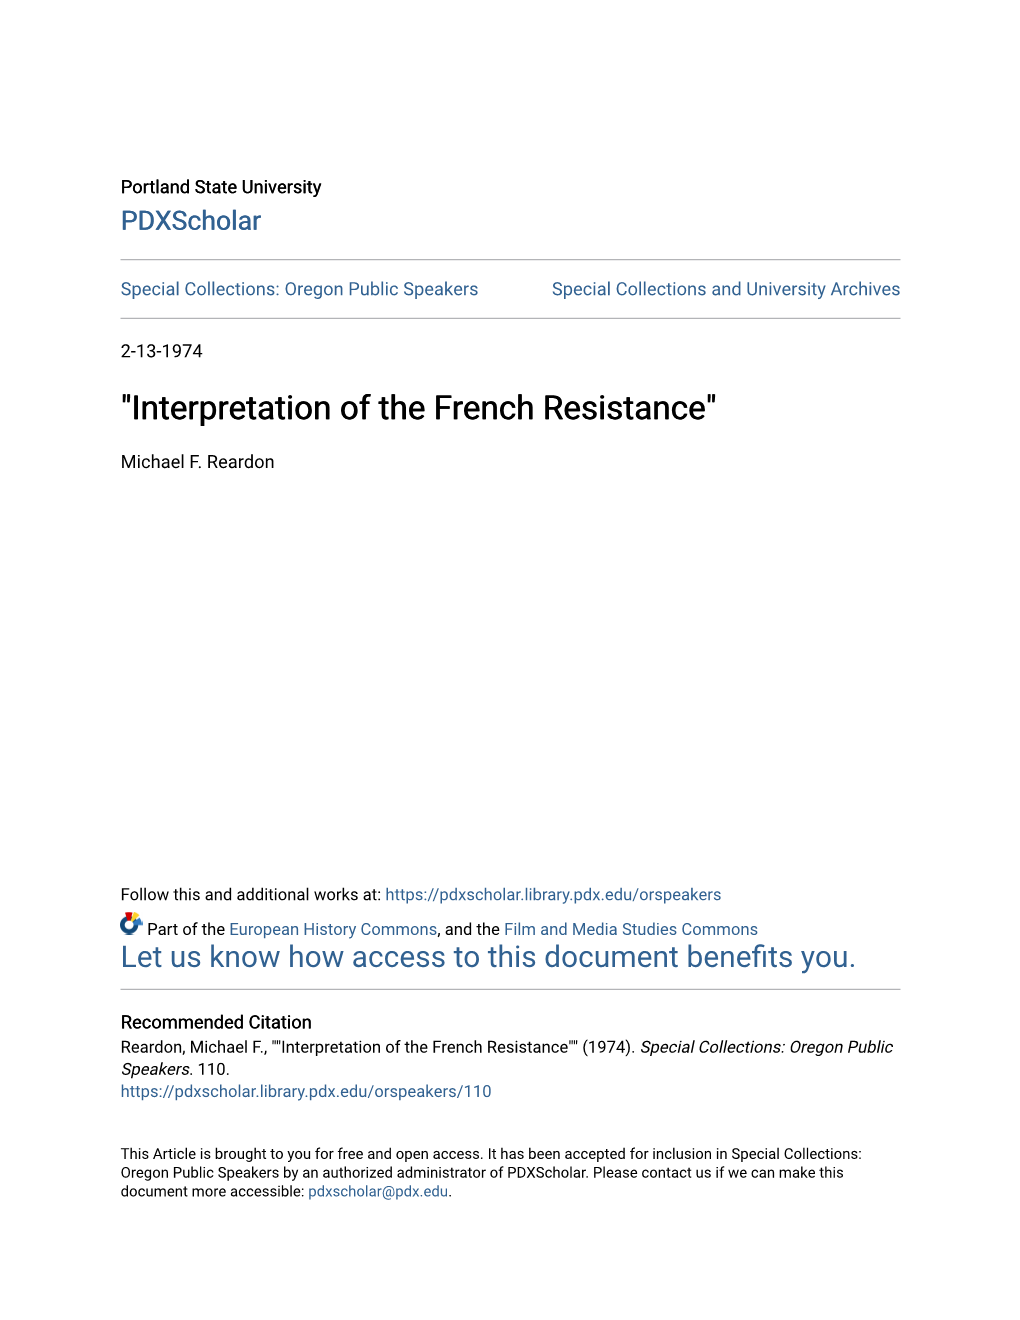 "Interpretation of the French Resistance"